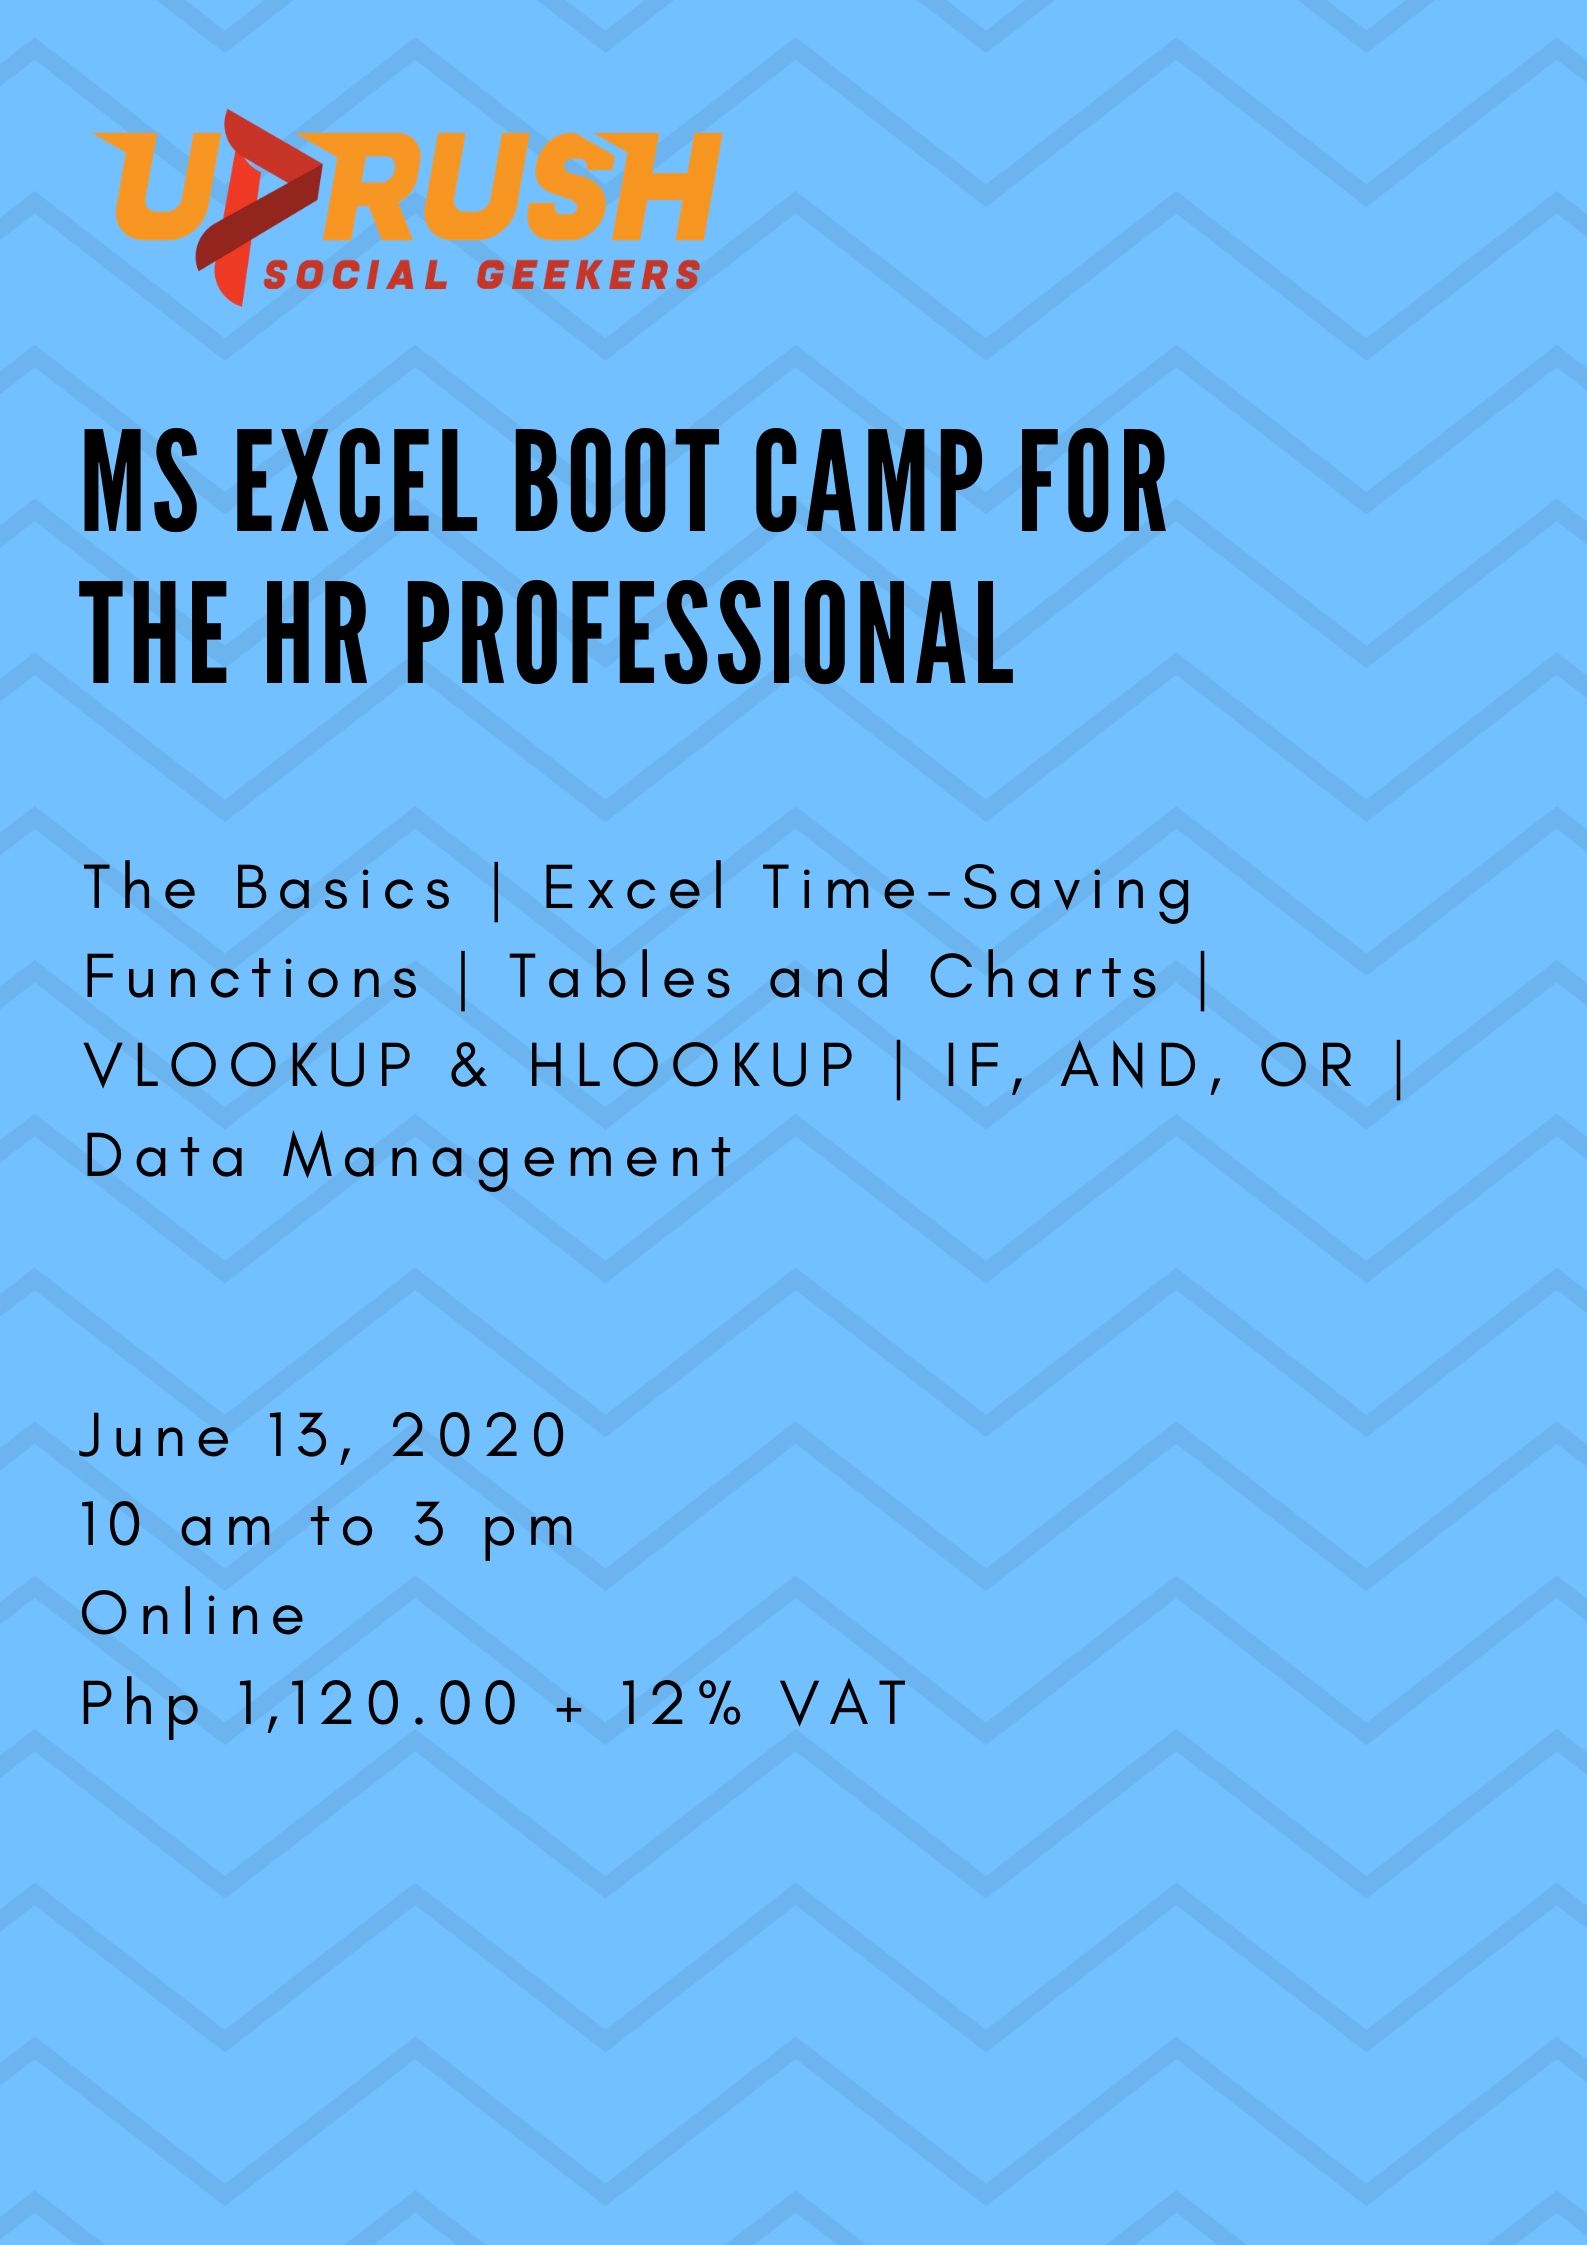 MS Excel Boot Camp for HR Professionals